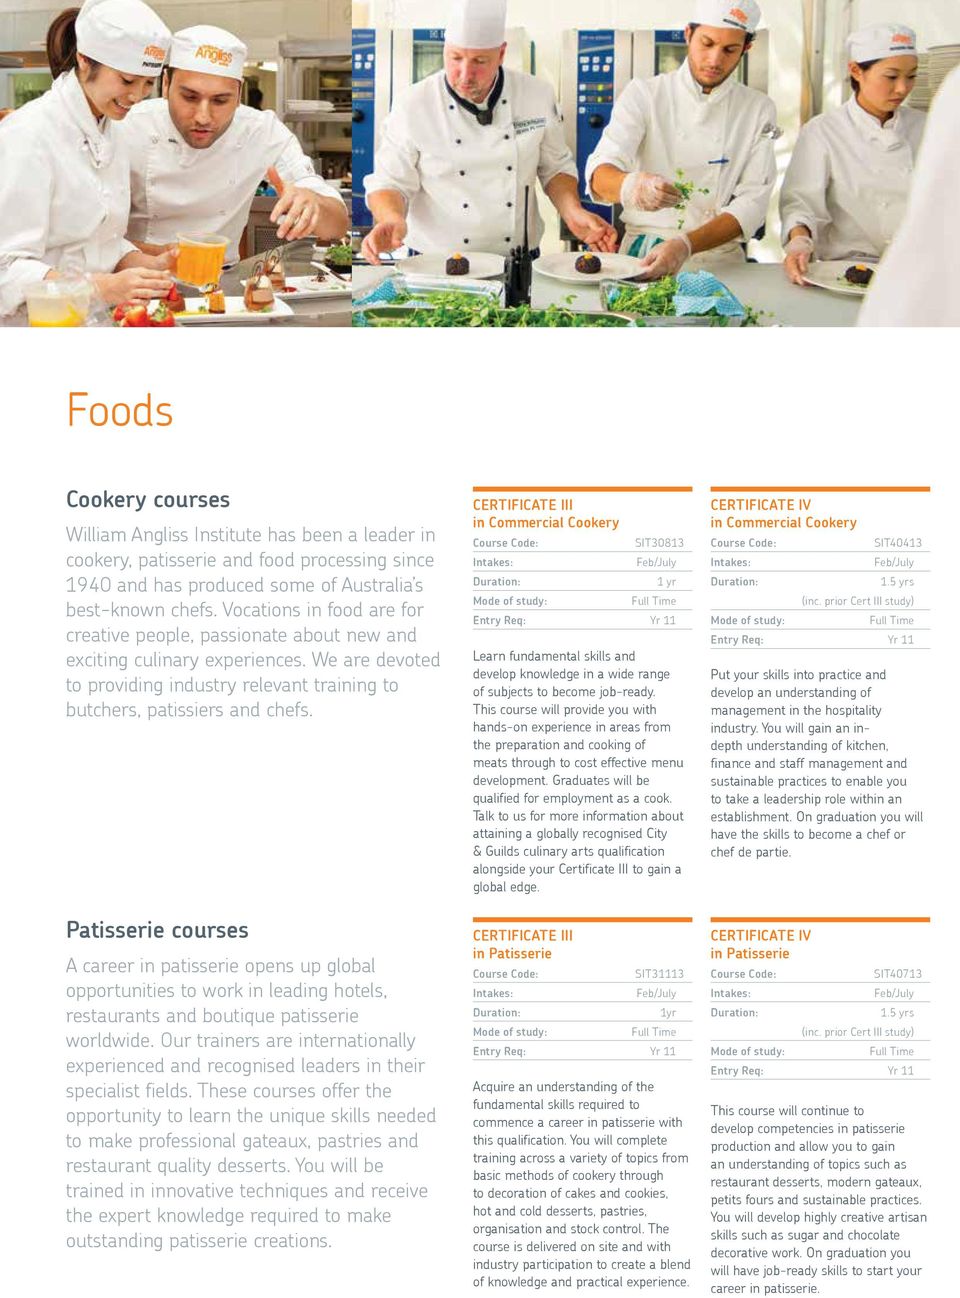 William Angliss Institute has been a leader in cookery, patisserie and food processing since 1940 Direct and applications has produced some of Australia s VET FEE-HELP best-known For applications